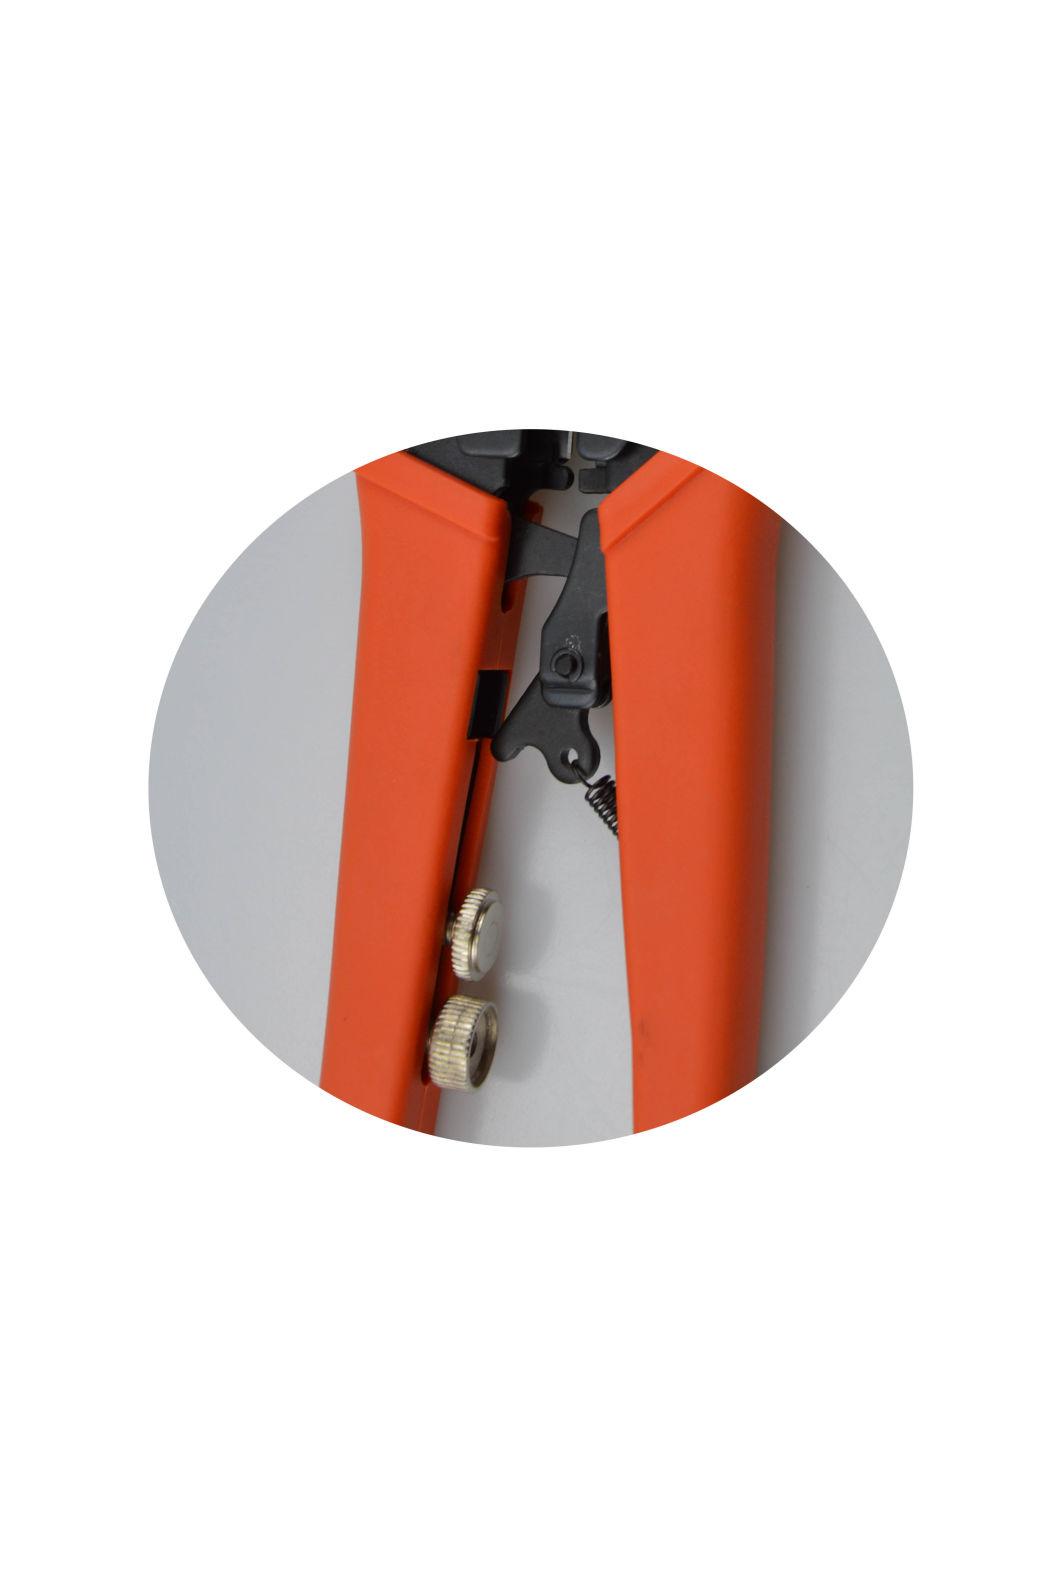 Tool for RJ45 and Cable Stripper RJ45 Rj12 Rj11 Network Cable Crimper Cutting